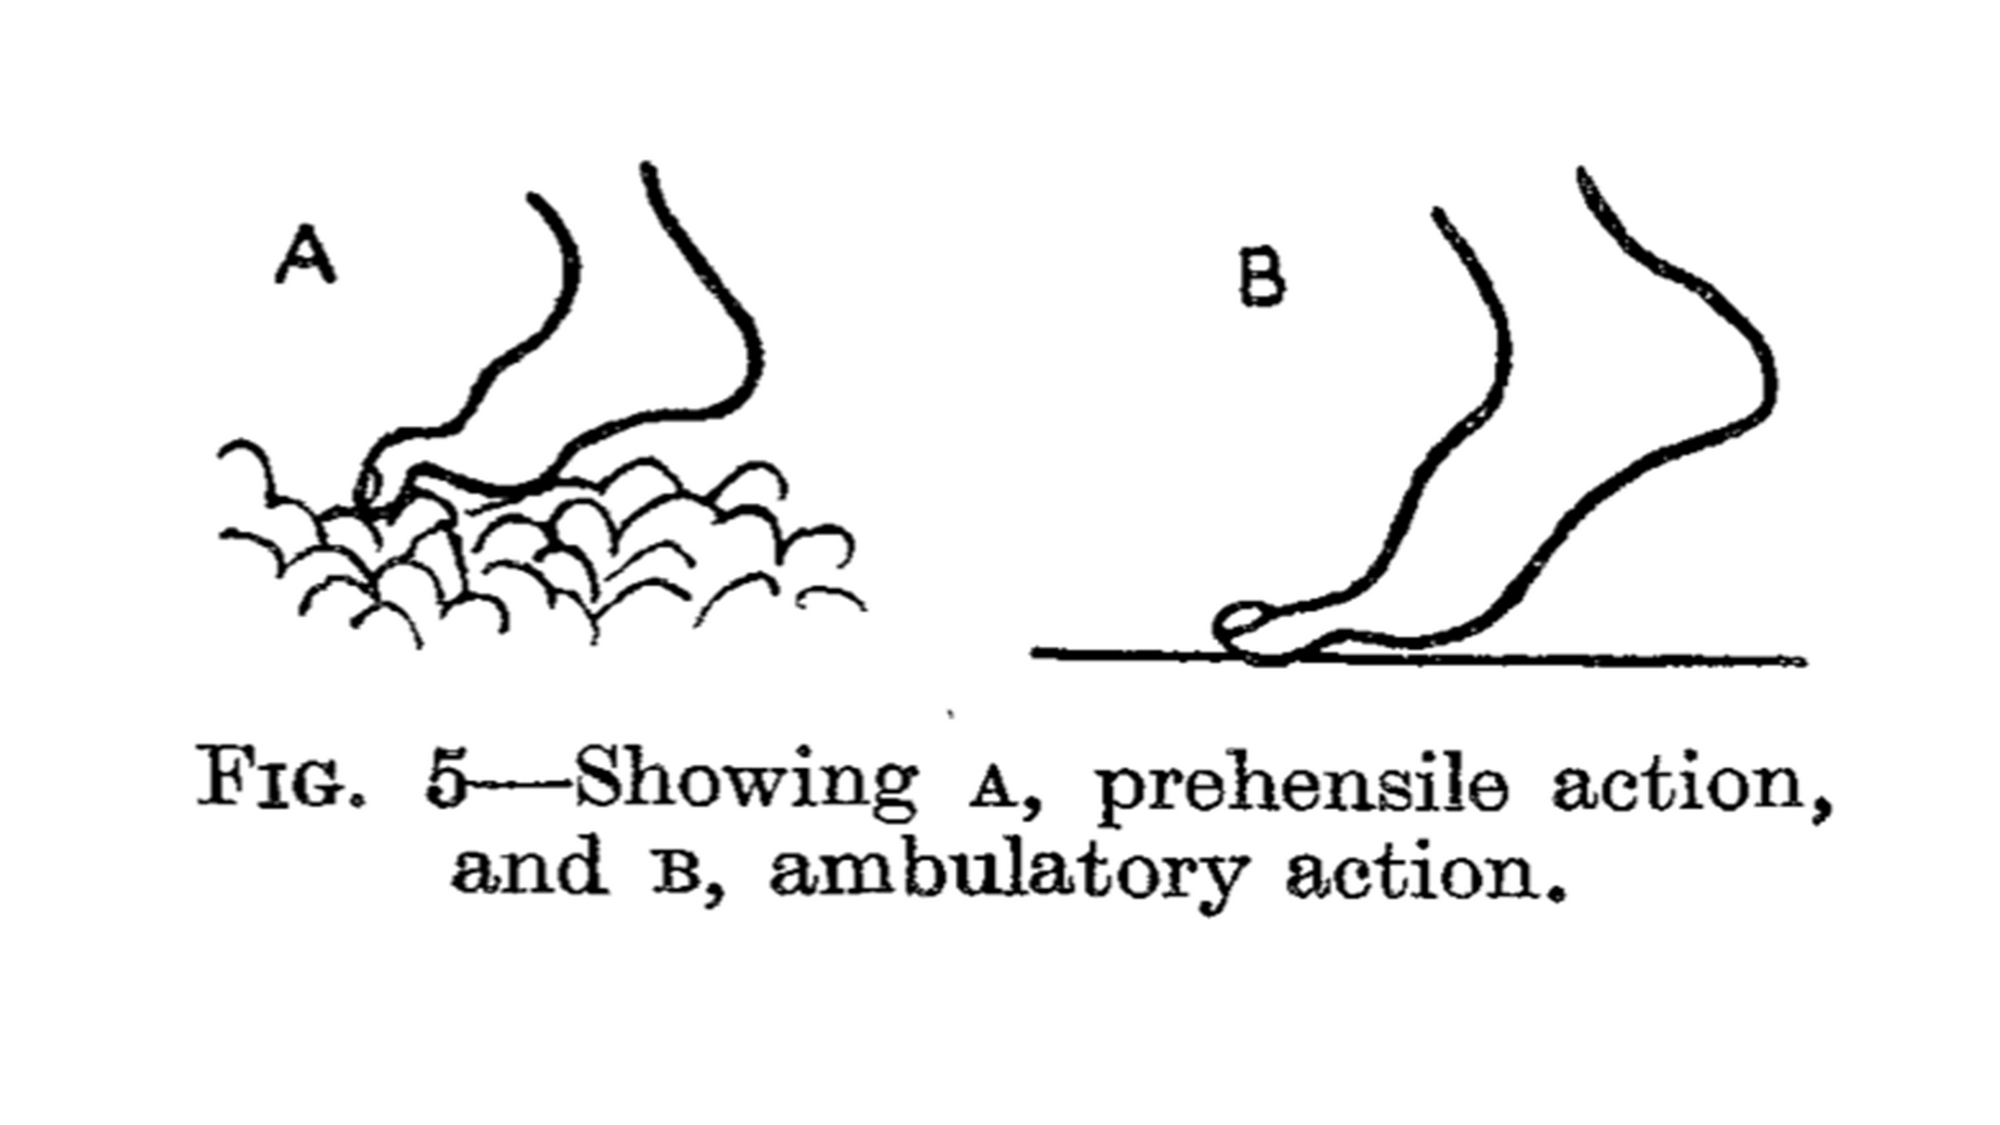 The feet of the industrial worker - E. P. CATHCART, M.D